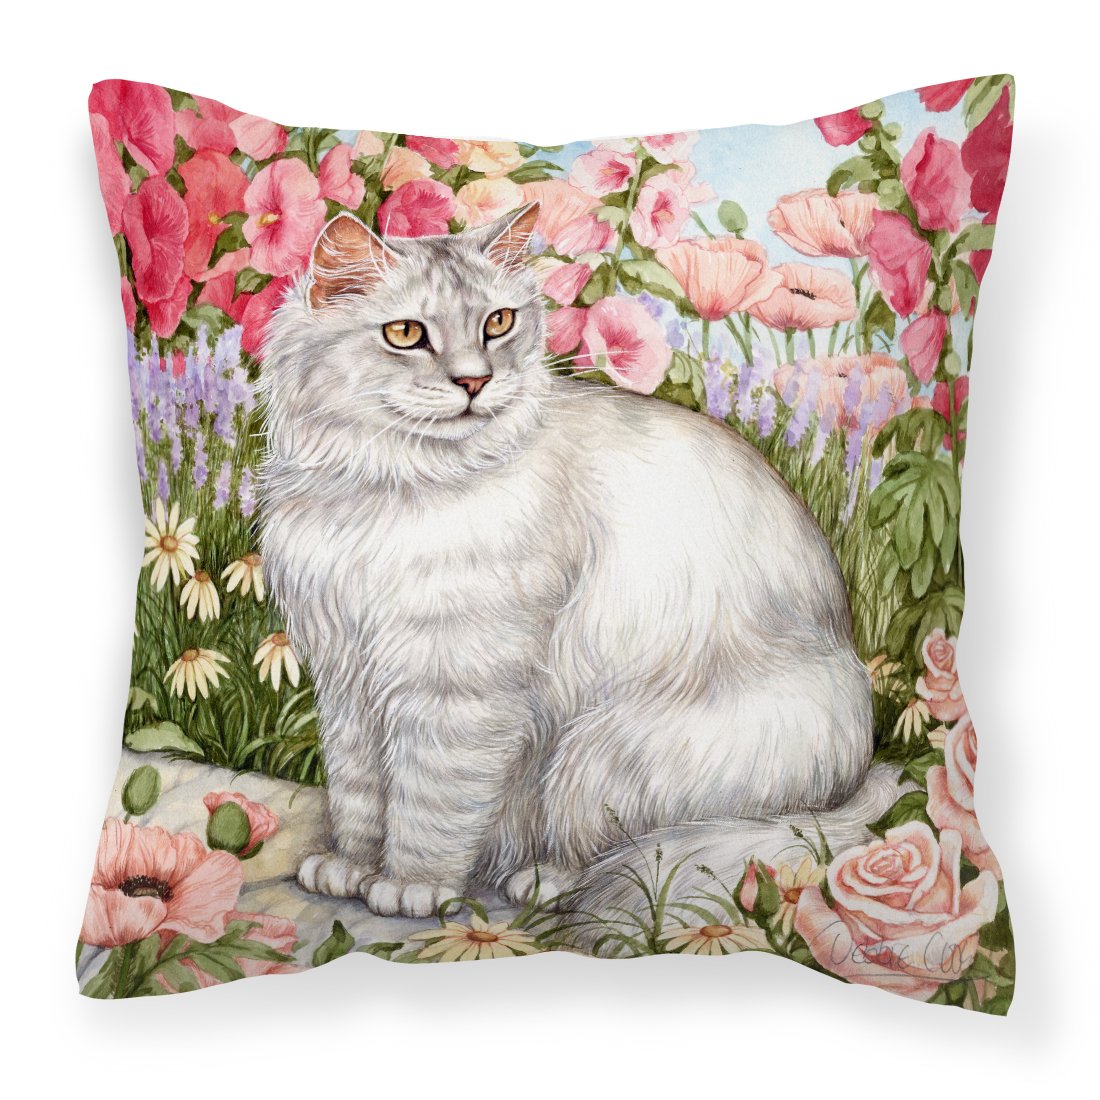 Cats Just Looking in the fish bowl Canvas Decorative Pillow by Caroline's Treasures